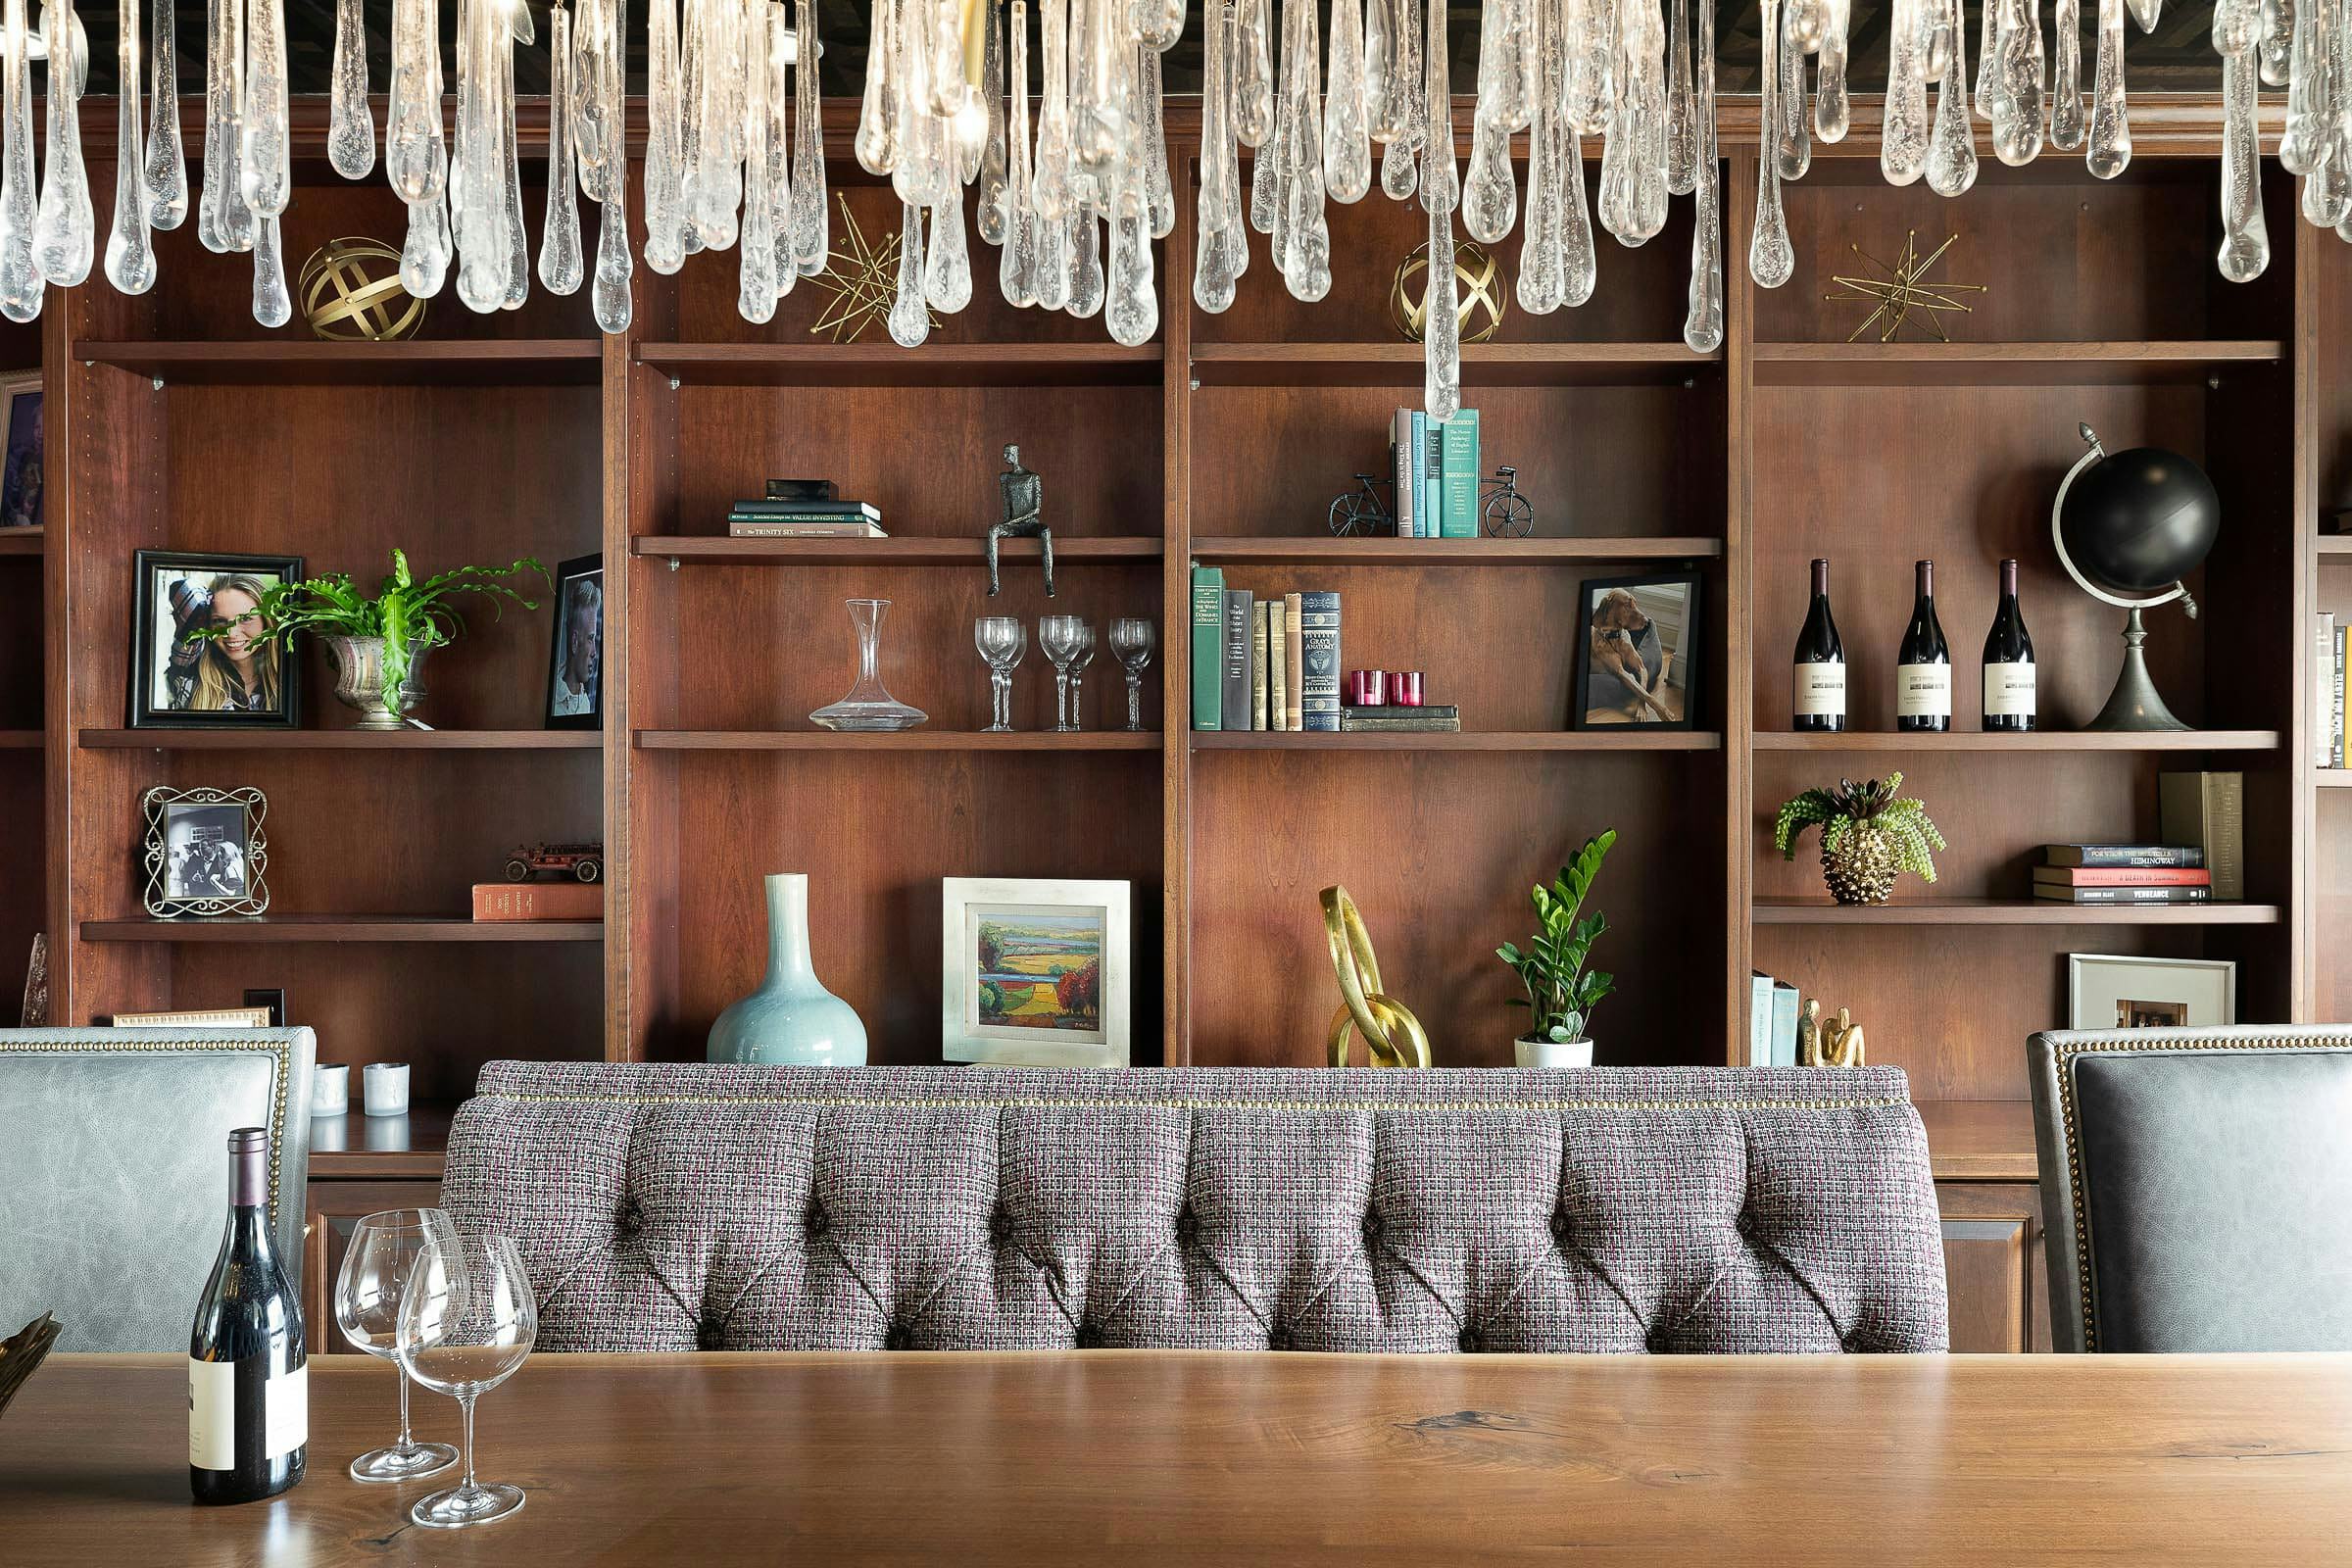 tasting room with banquette style seating, contemporary crystal chandelier with teardrop design